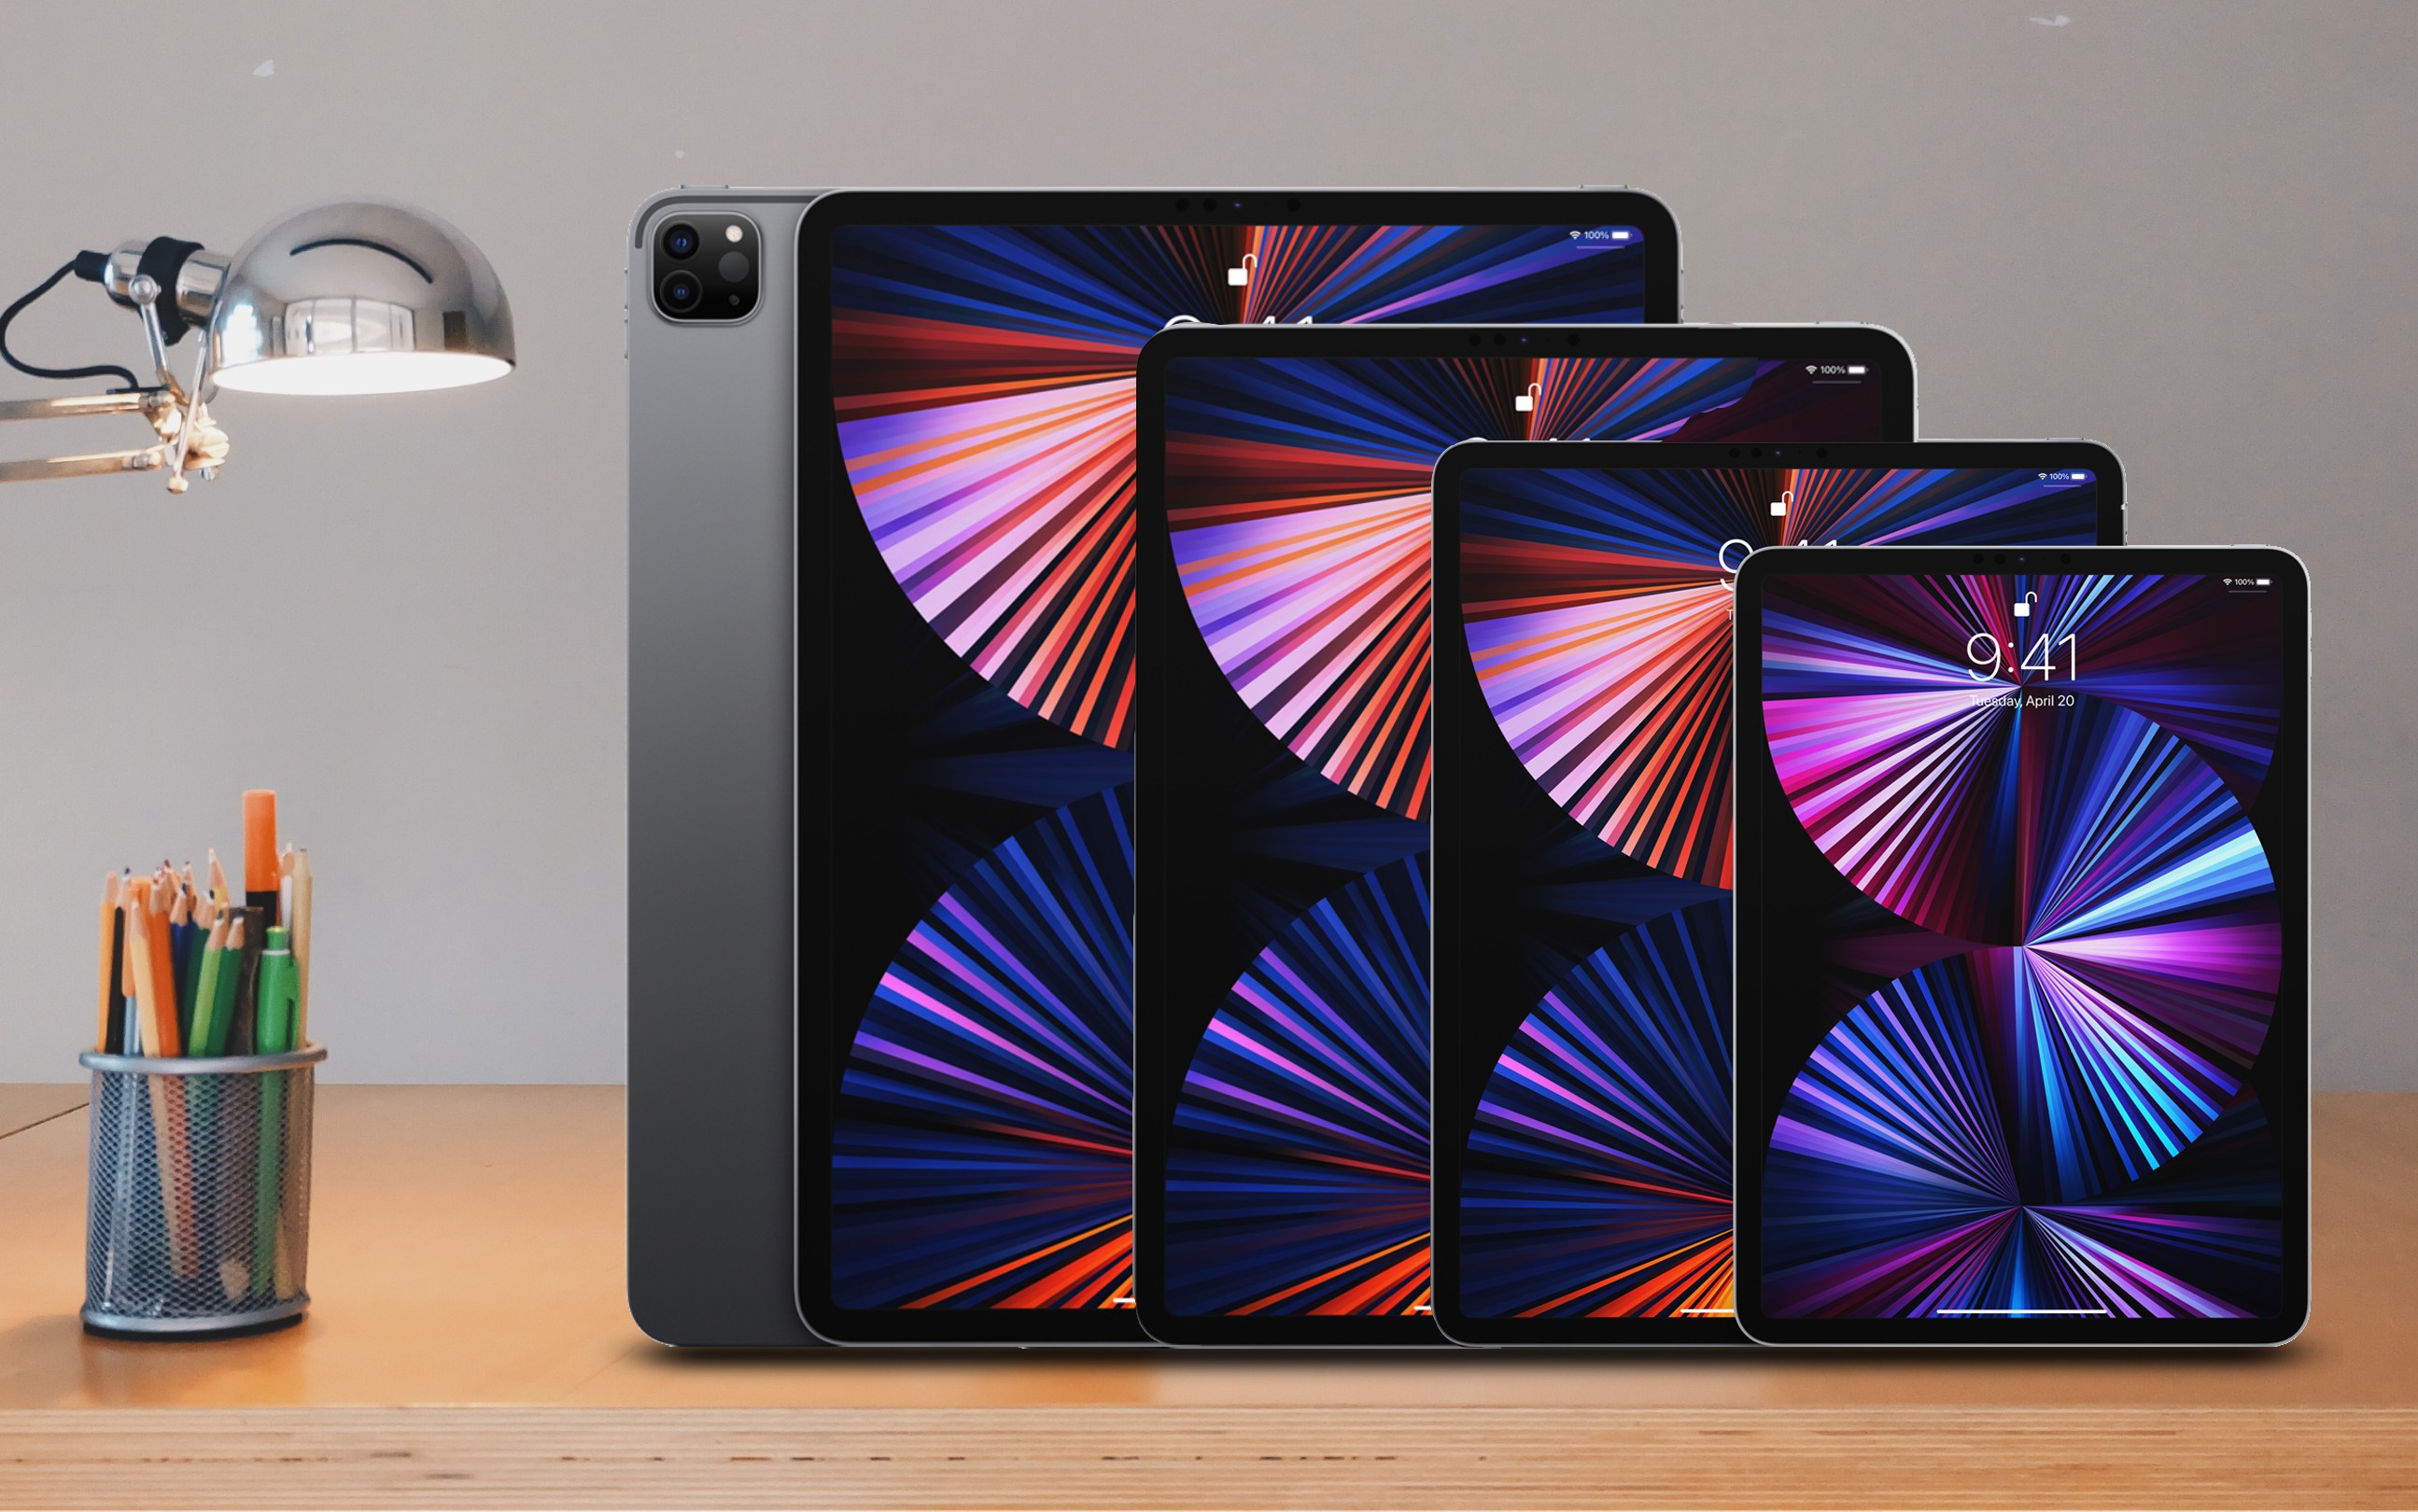 Apple may be exploring the possibility of larger iPad Pros, 14" and